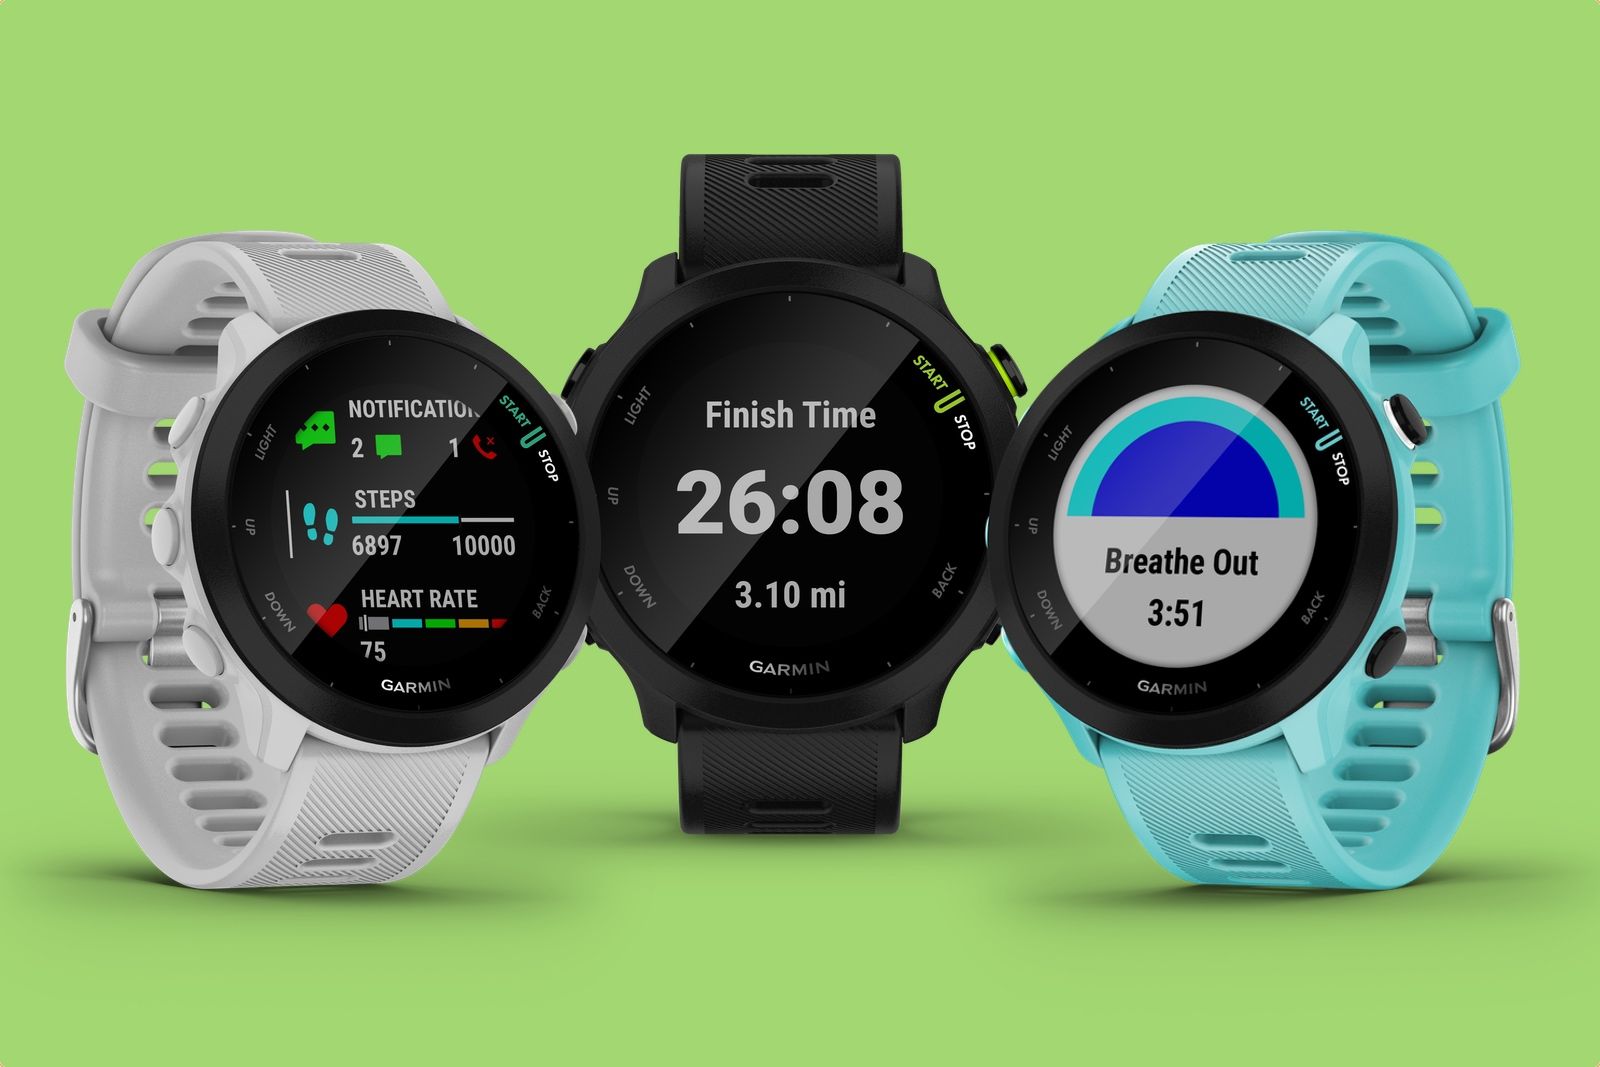 Garmin upgrades its entry-level GPS watch - Forerunner 55 lands with improved battery and run tracking smarts photo 1